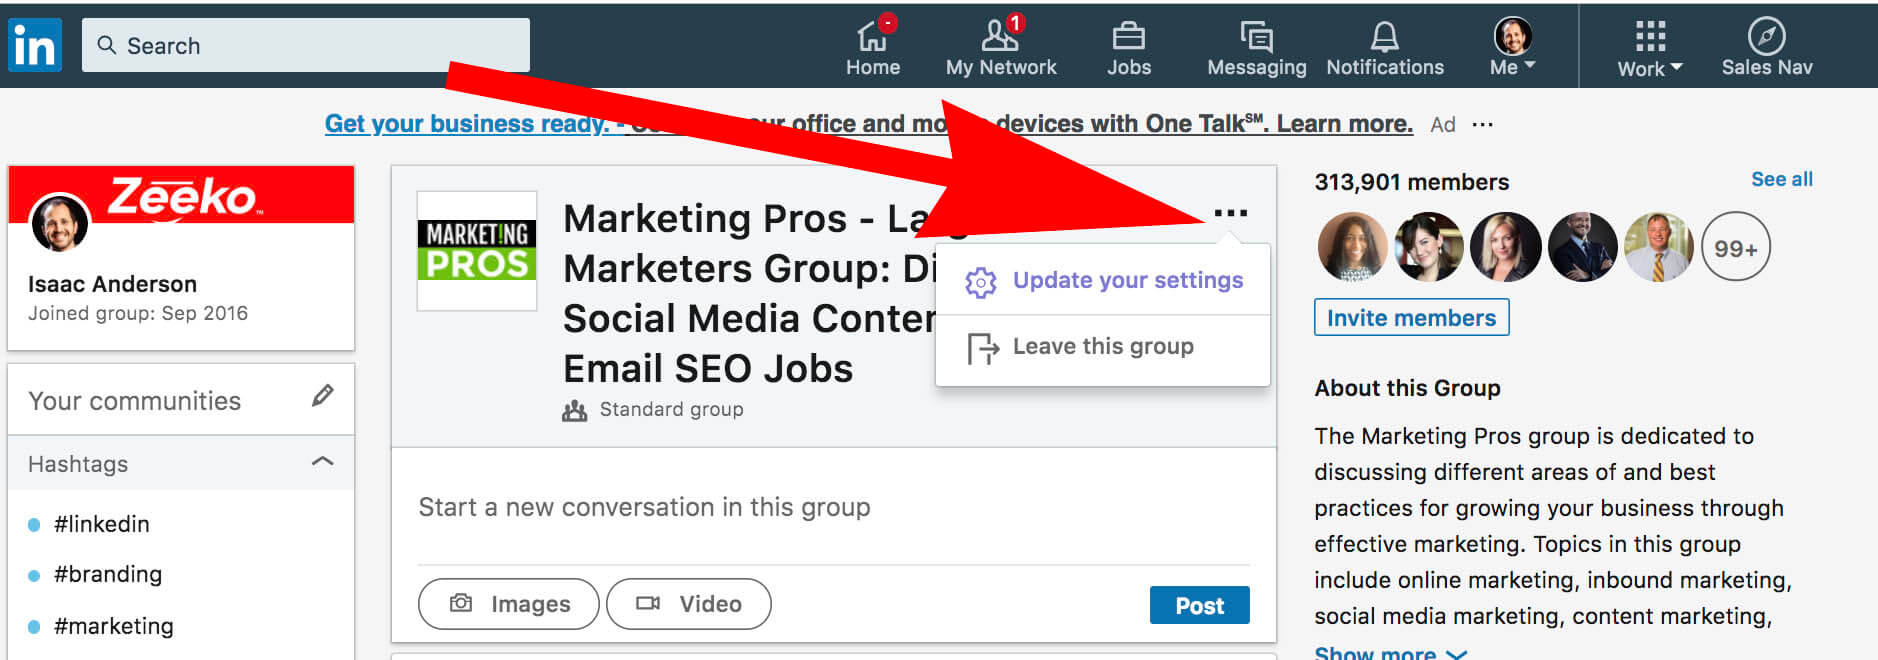 How to update and remove interests on Linkedin - group settings